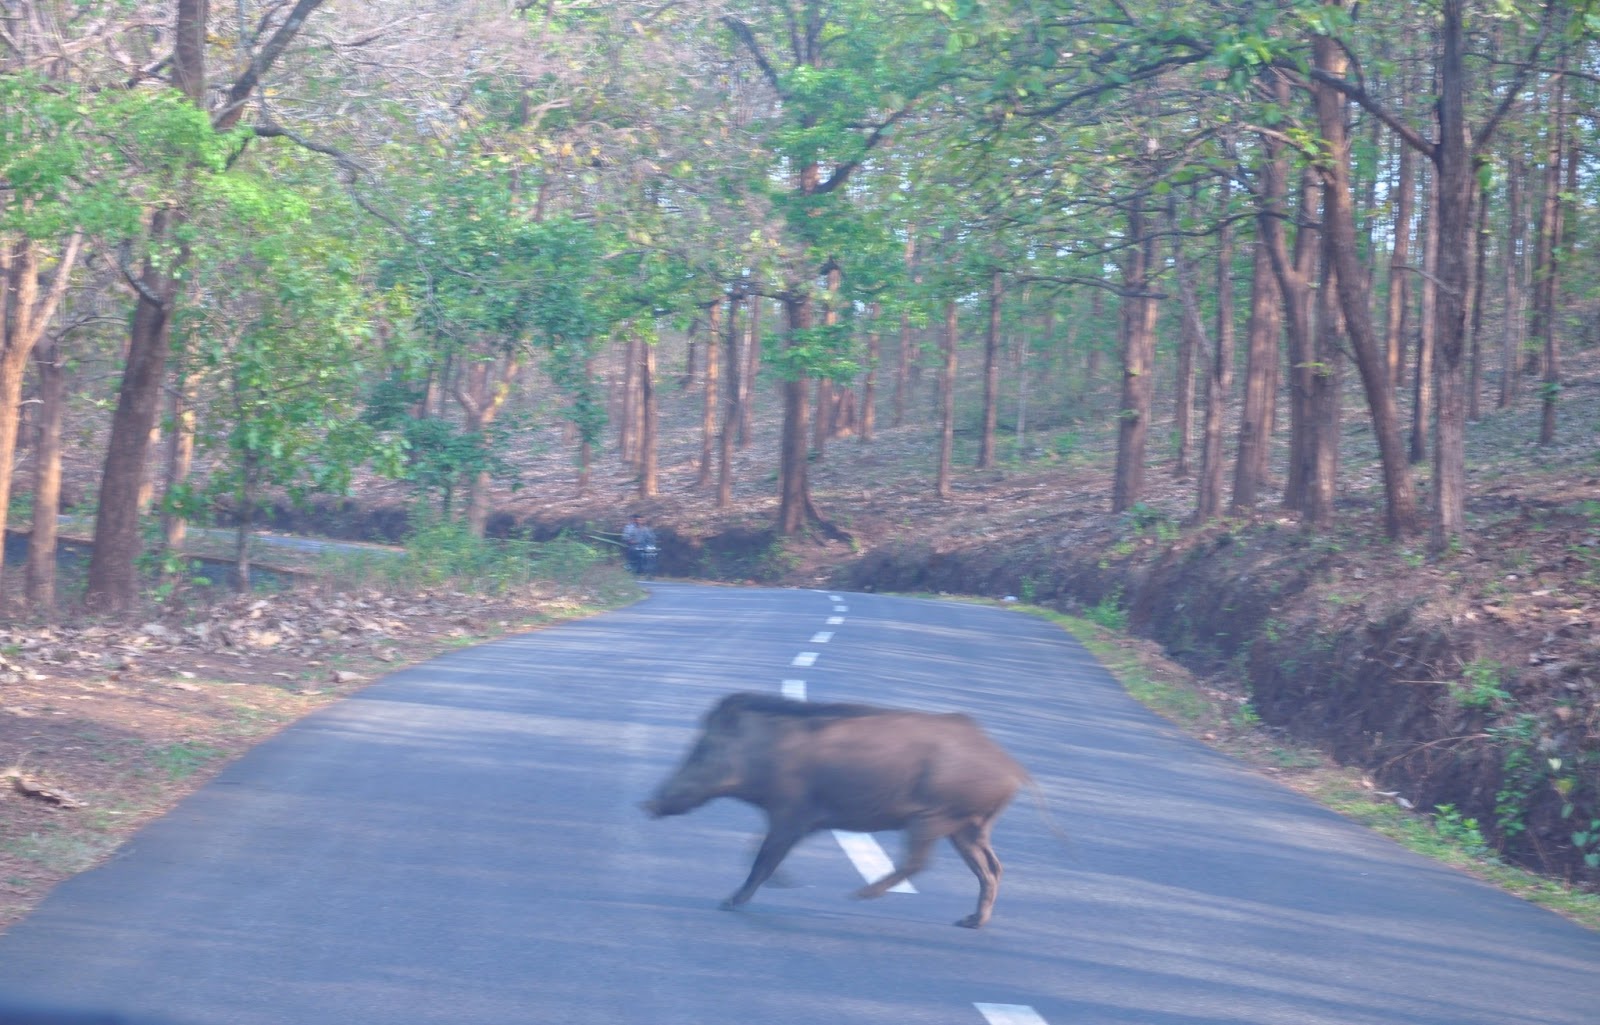 WILD ANIMAL CROSSING THE ROAD - PIG